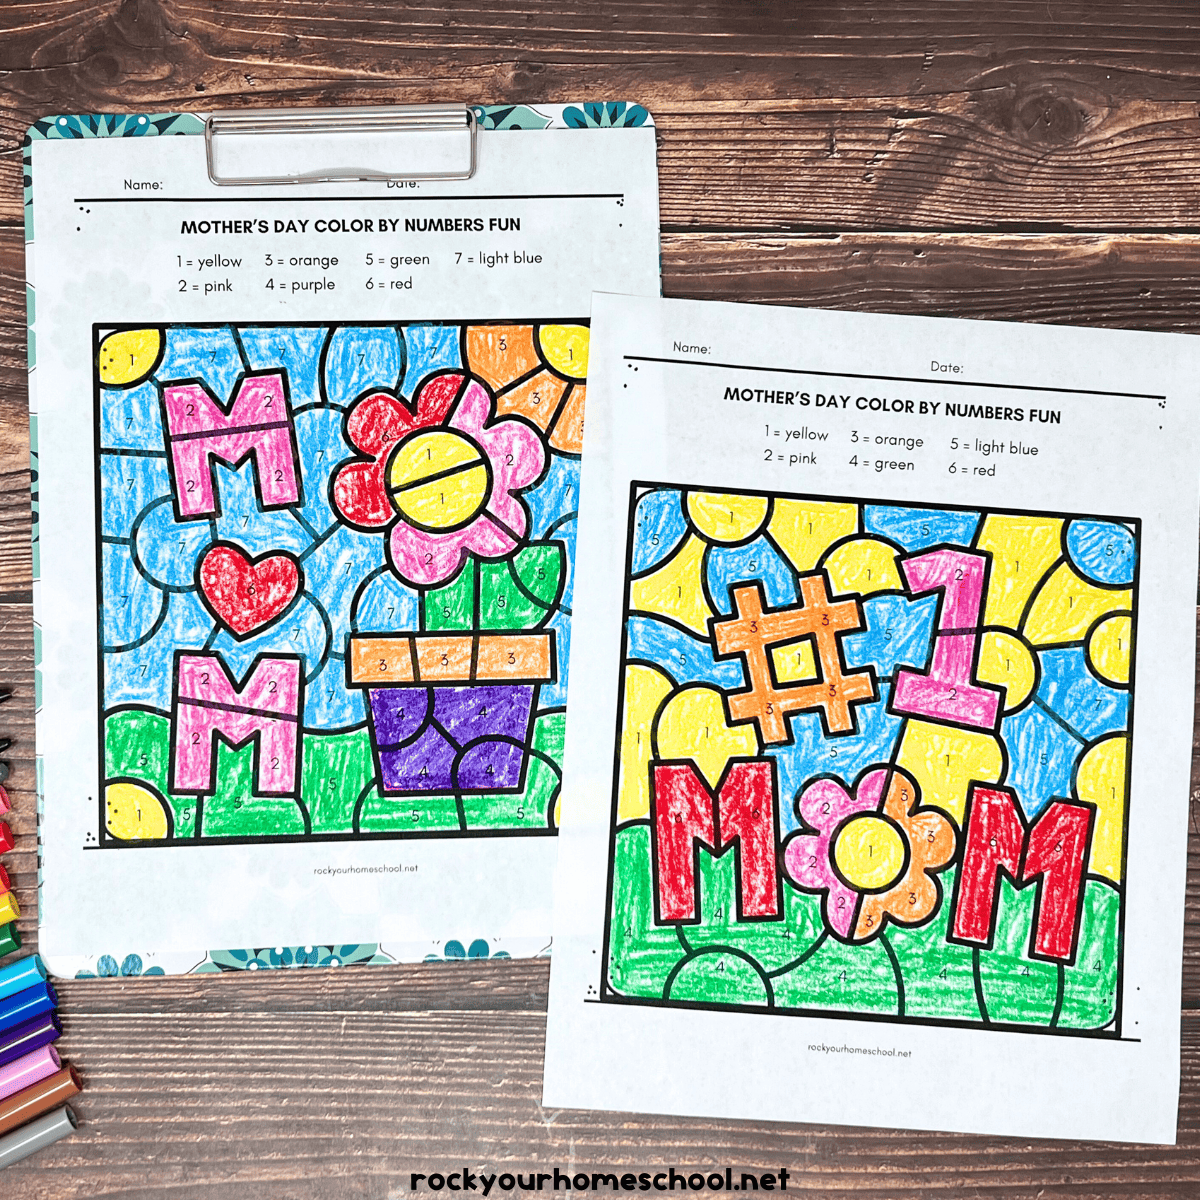 8 Free Mother's Day Color by Number Pages for Delightful Fun